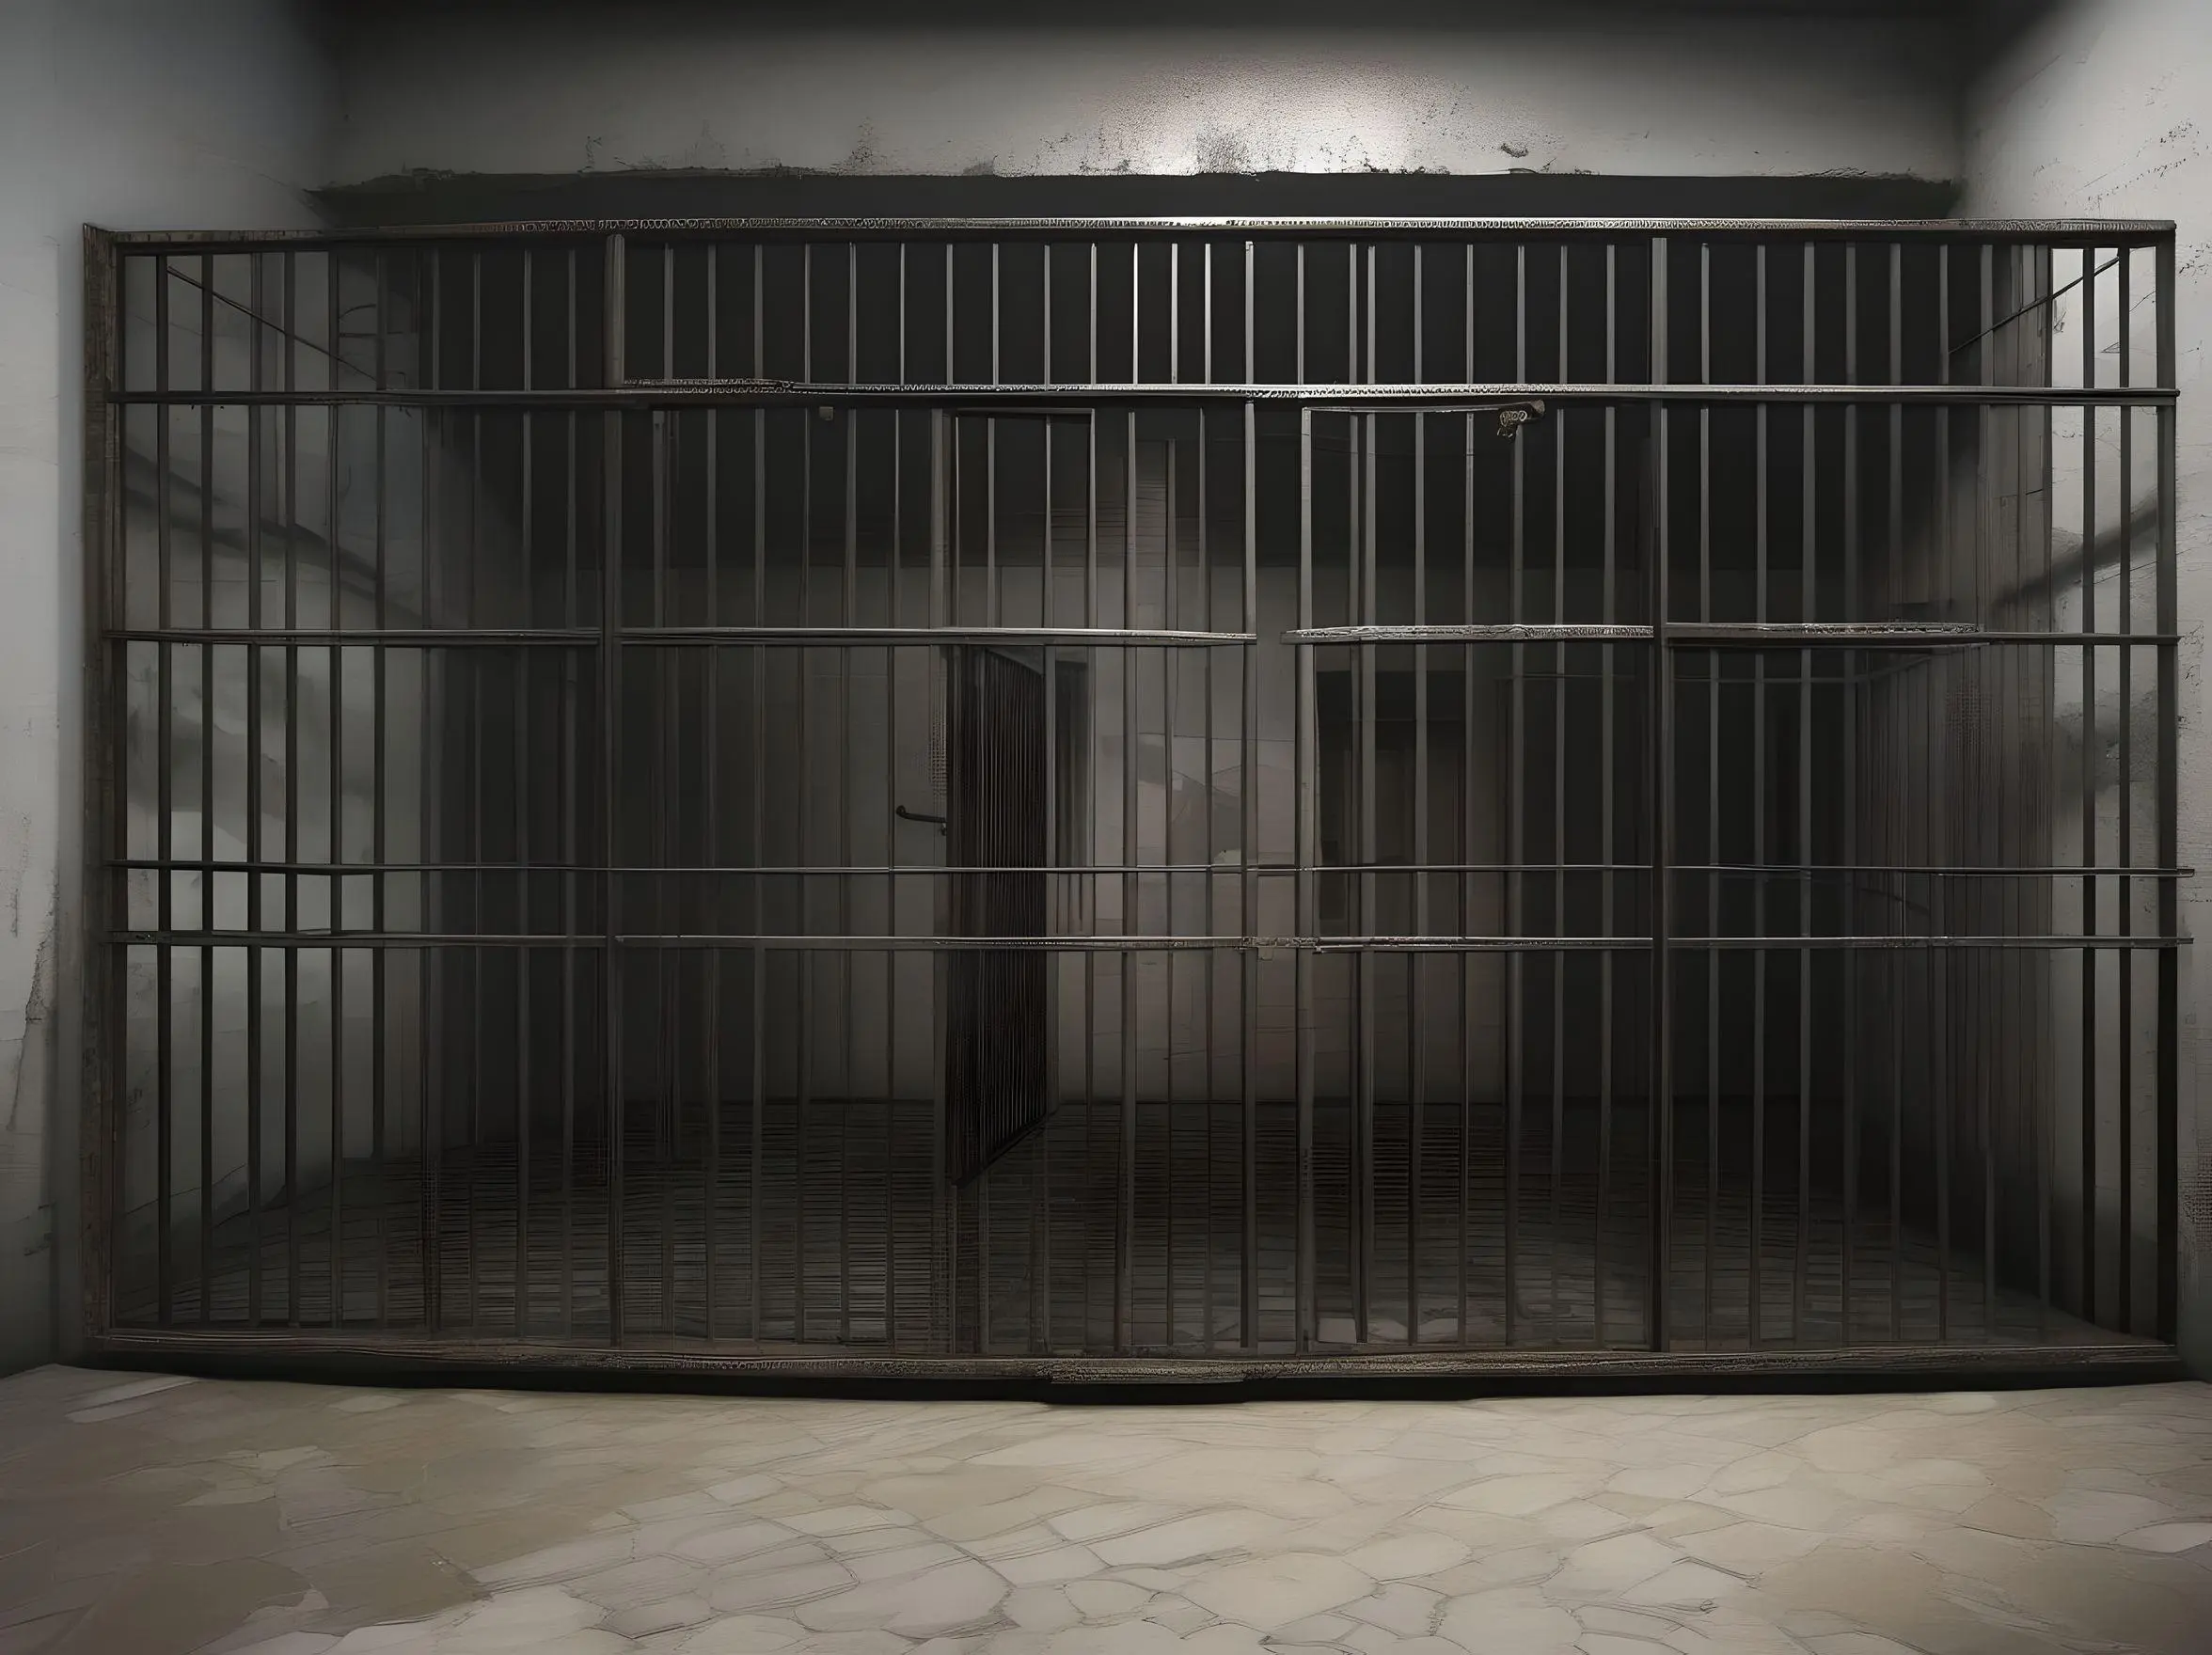 Image depicting the mental prison of trauma, symbolizing confinement and emotional distress.